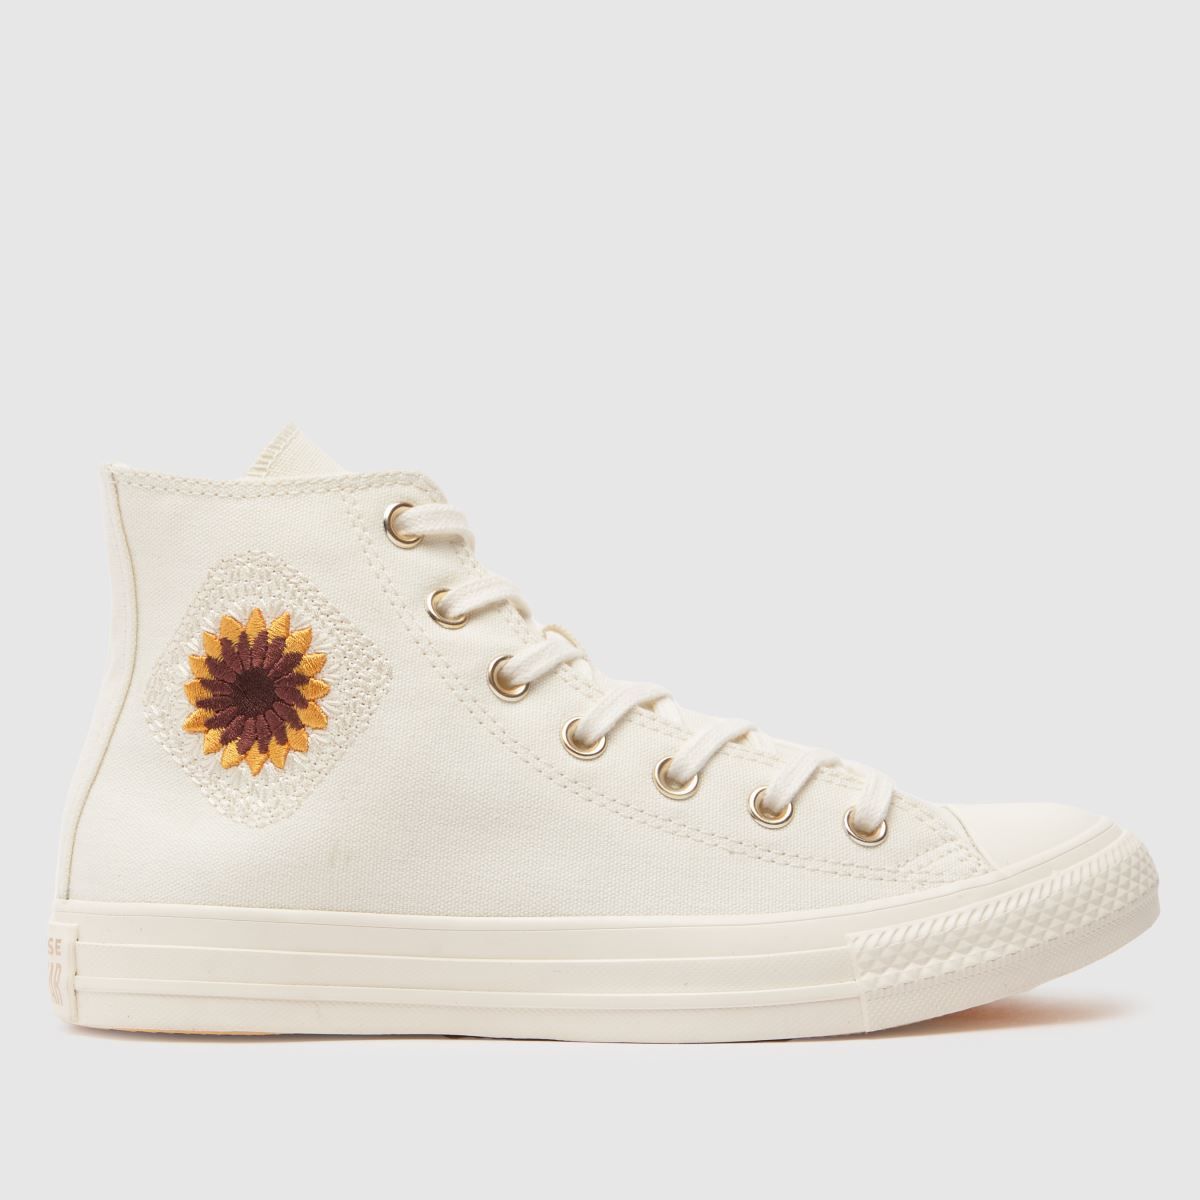 Converse all star hi festival floral trainers in white & gold | Schuh